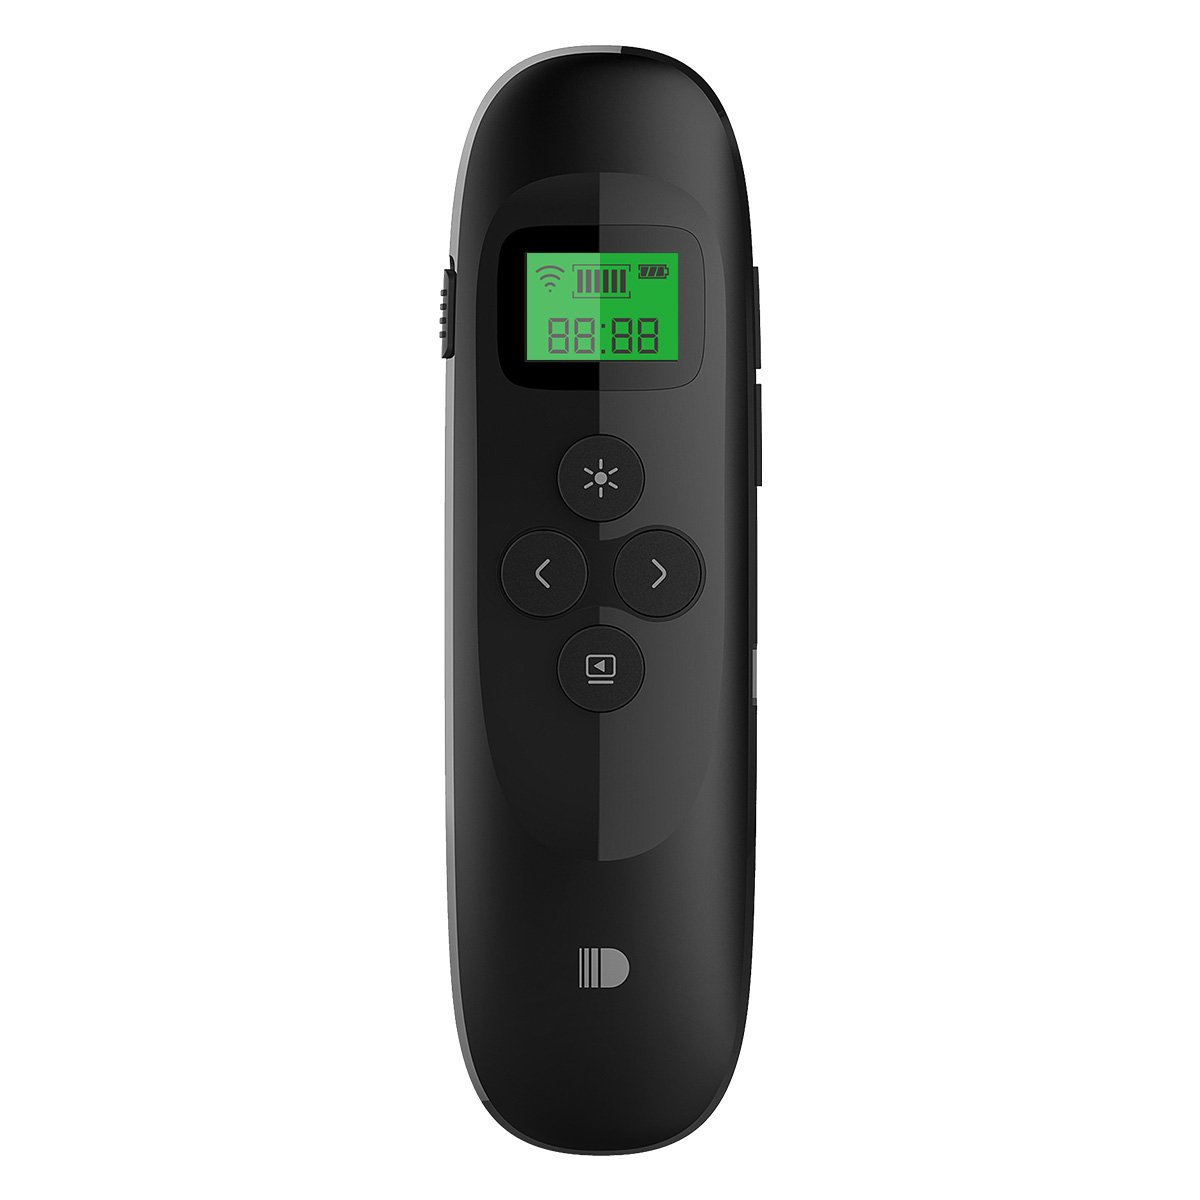 DSIT021---Presentation Remote, Doosl Rechargeable Wireless Presenter with LCD Display, 2.4GHz Wireless USB Powerpoint PPT Clicker Remote Control (Black)